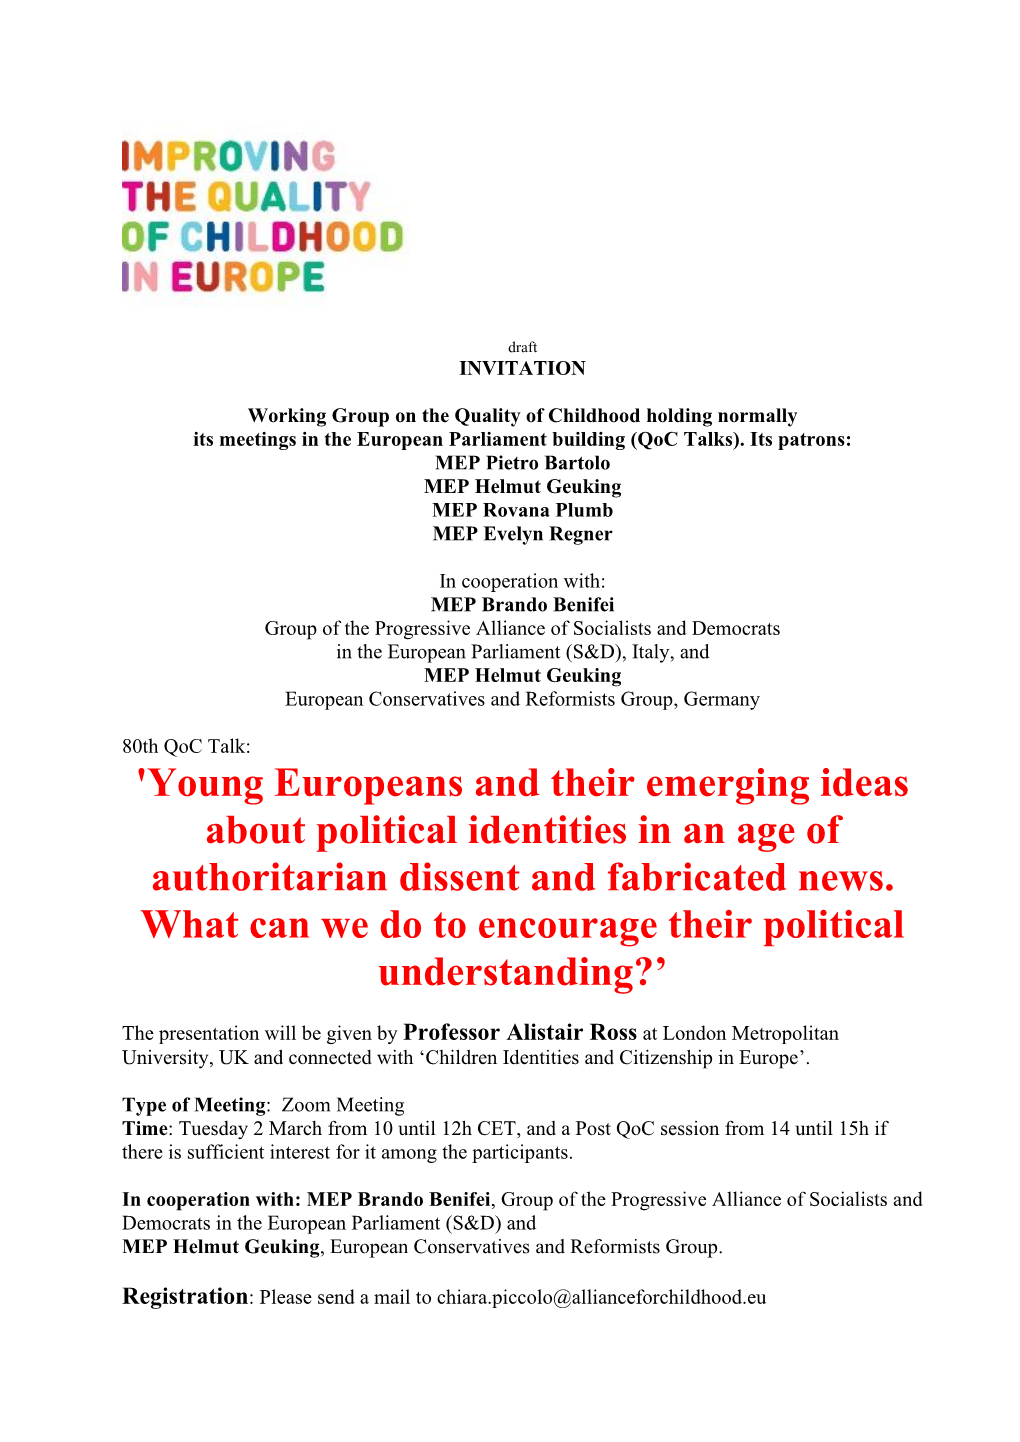 Young Europeans and Their Emerging Ideas About Political Identities in an Age of Authoritarian Dissent and Fabricated News